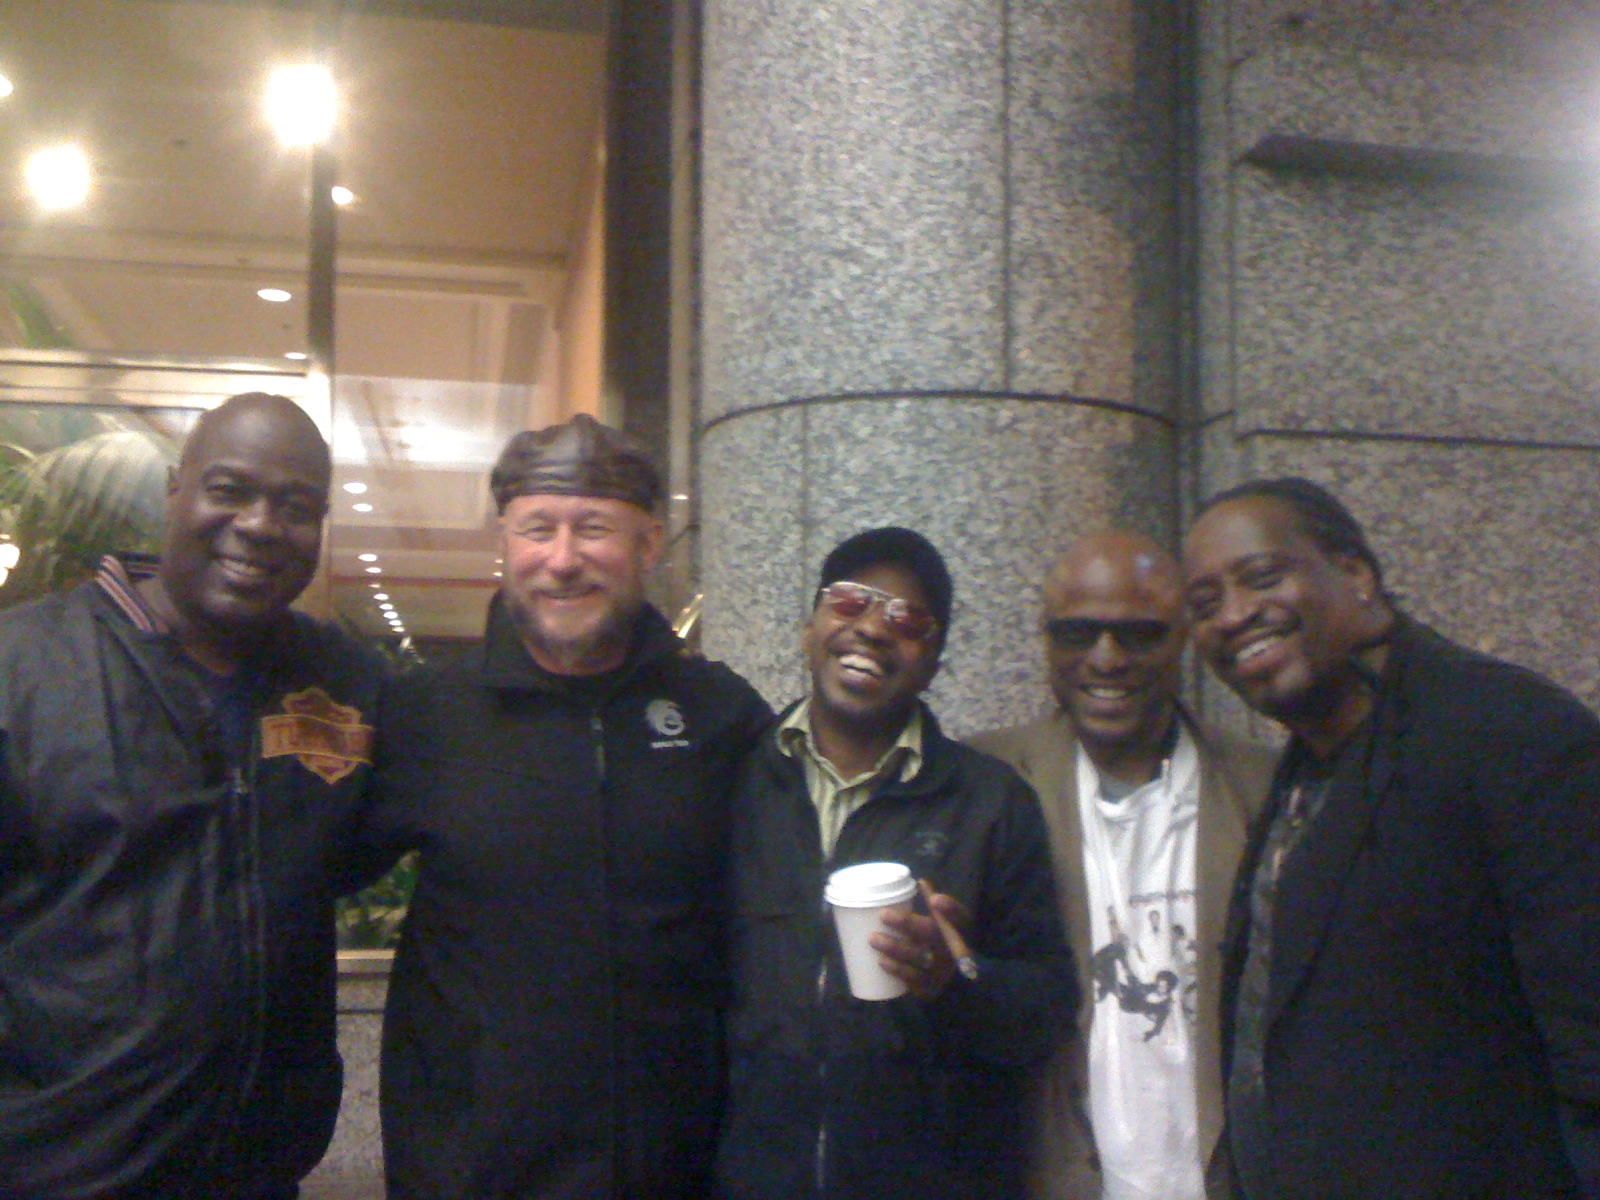 JB Warren with Earth, Wind and Fire, in Philadelphia. Gary Bias, Greg Moore, friend Lee Jr., and Morris O'Conner.